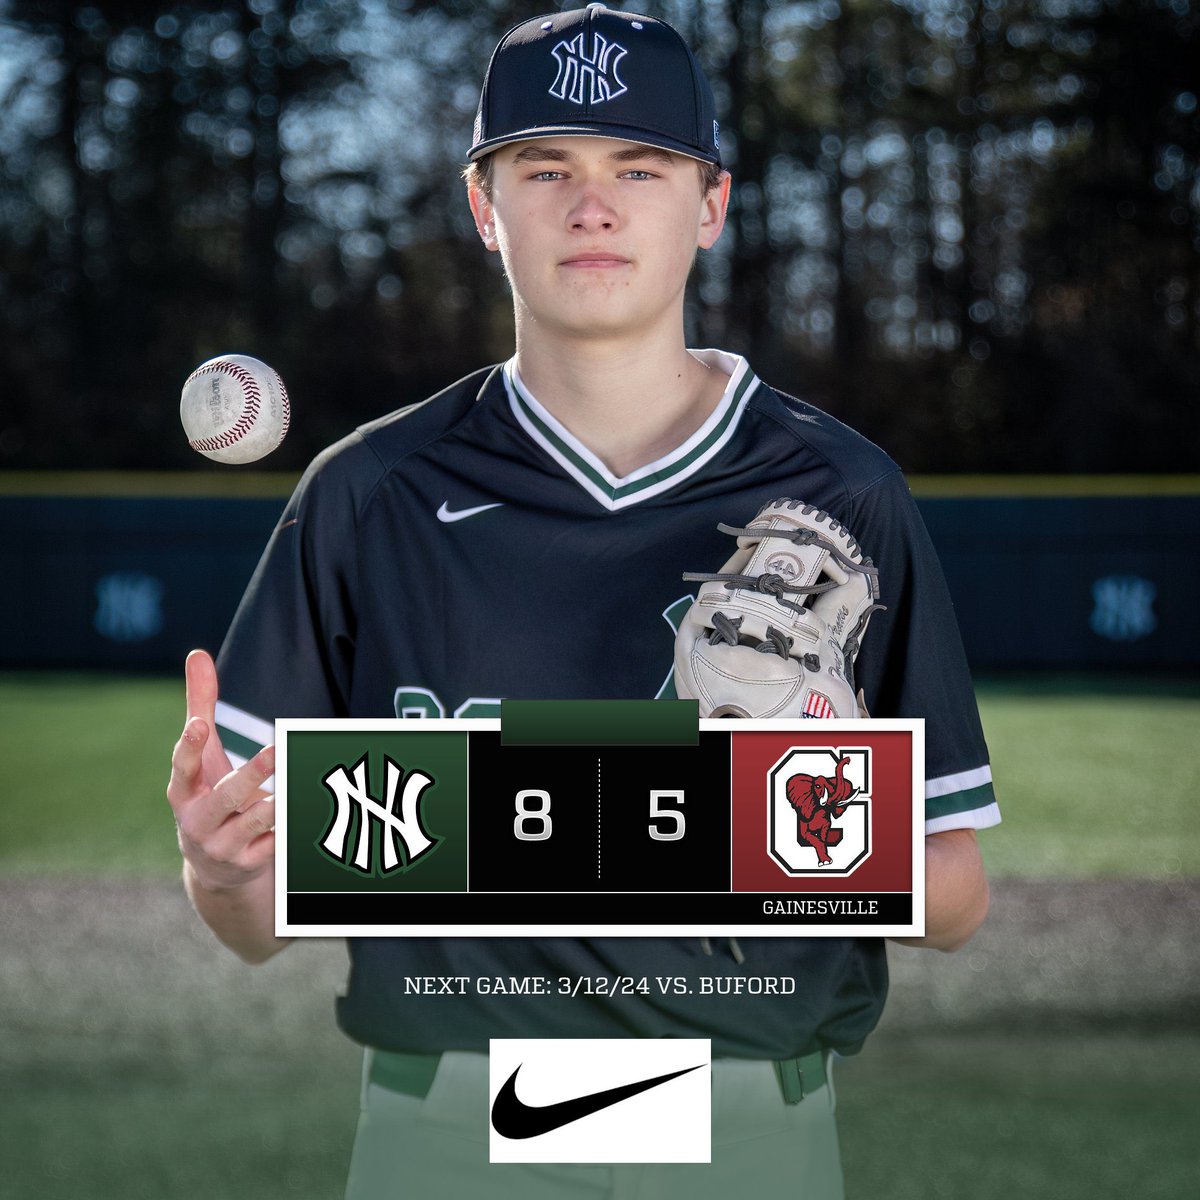 Varsity gets the win against Seckinger on the road to move to 11-1 and JV gets the win against Gainesville to move to 7-3 on the year. Next: Top 10 match up against East Forsyth at home on Monday!